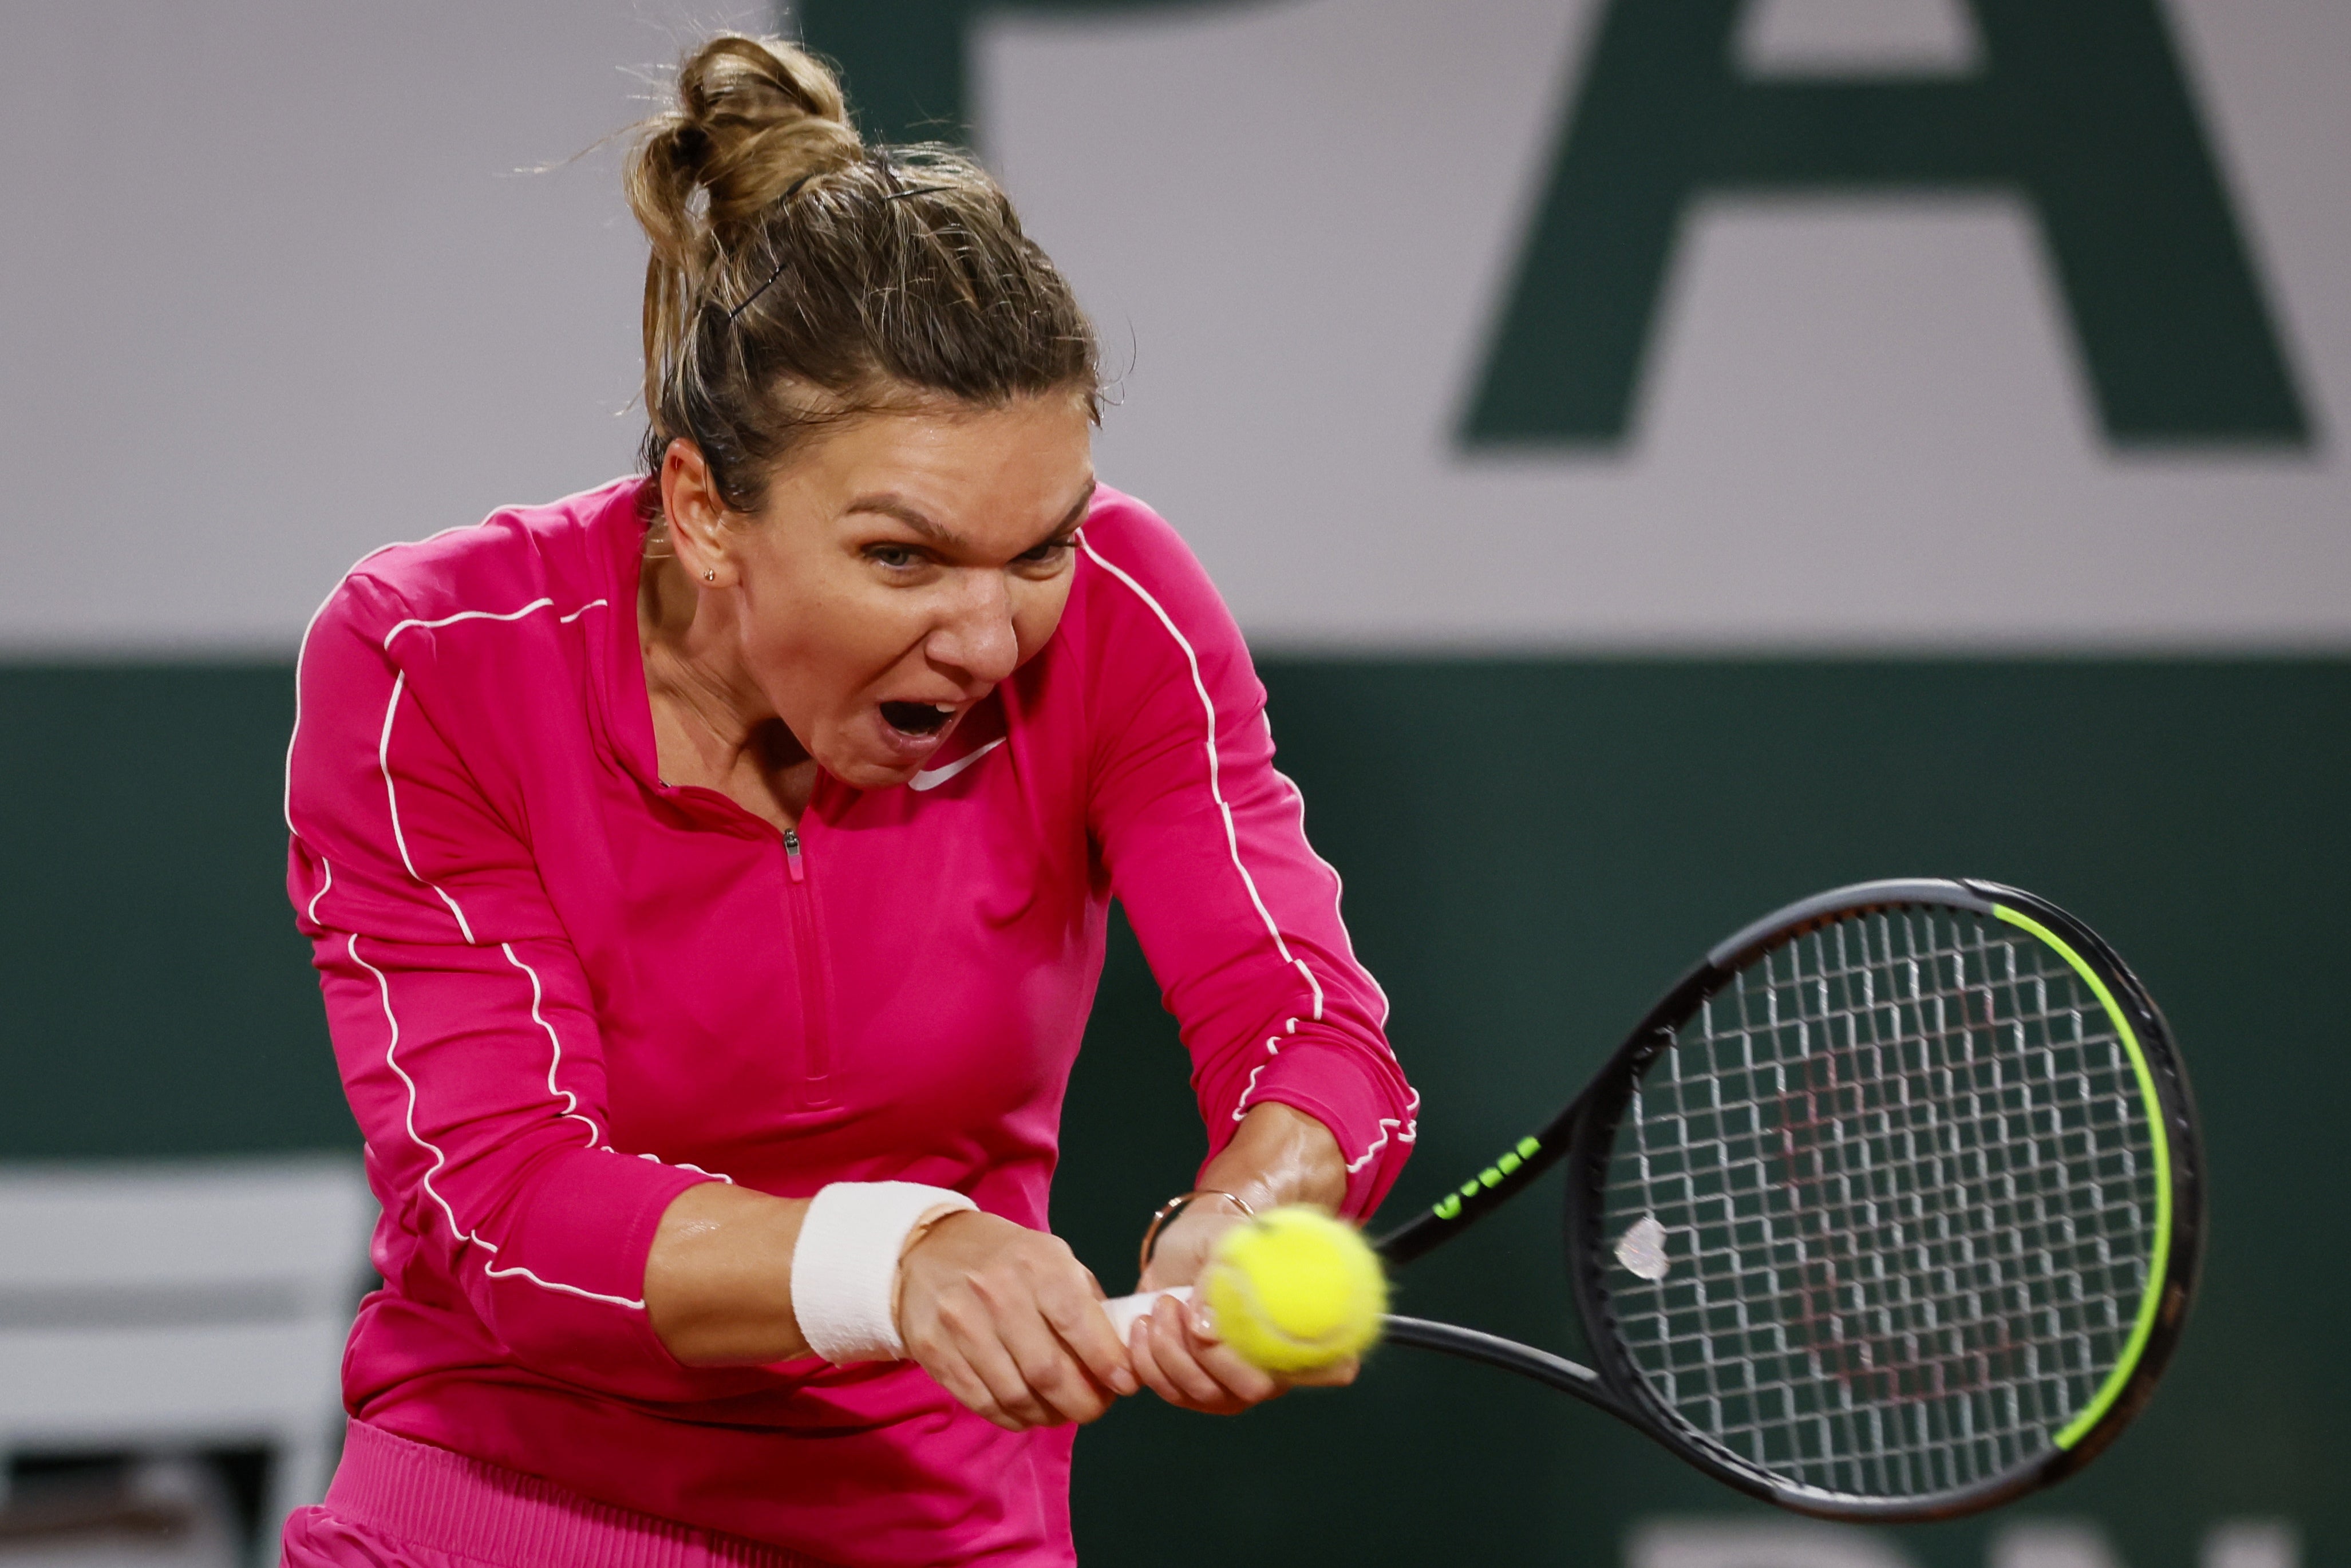 French Open results Simona Halep exacts revenge on Amanda Anisimova with brutal third-round win at Roland Garros The Independent